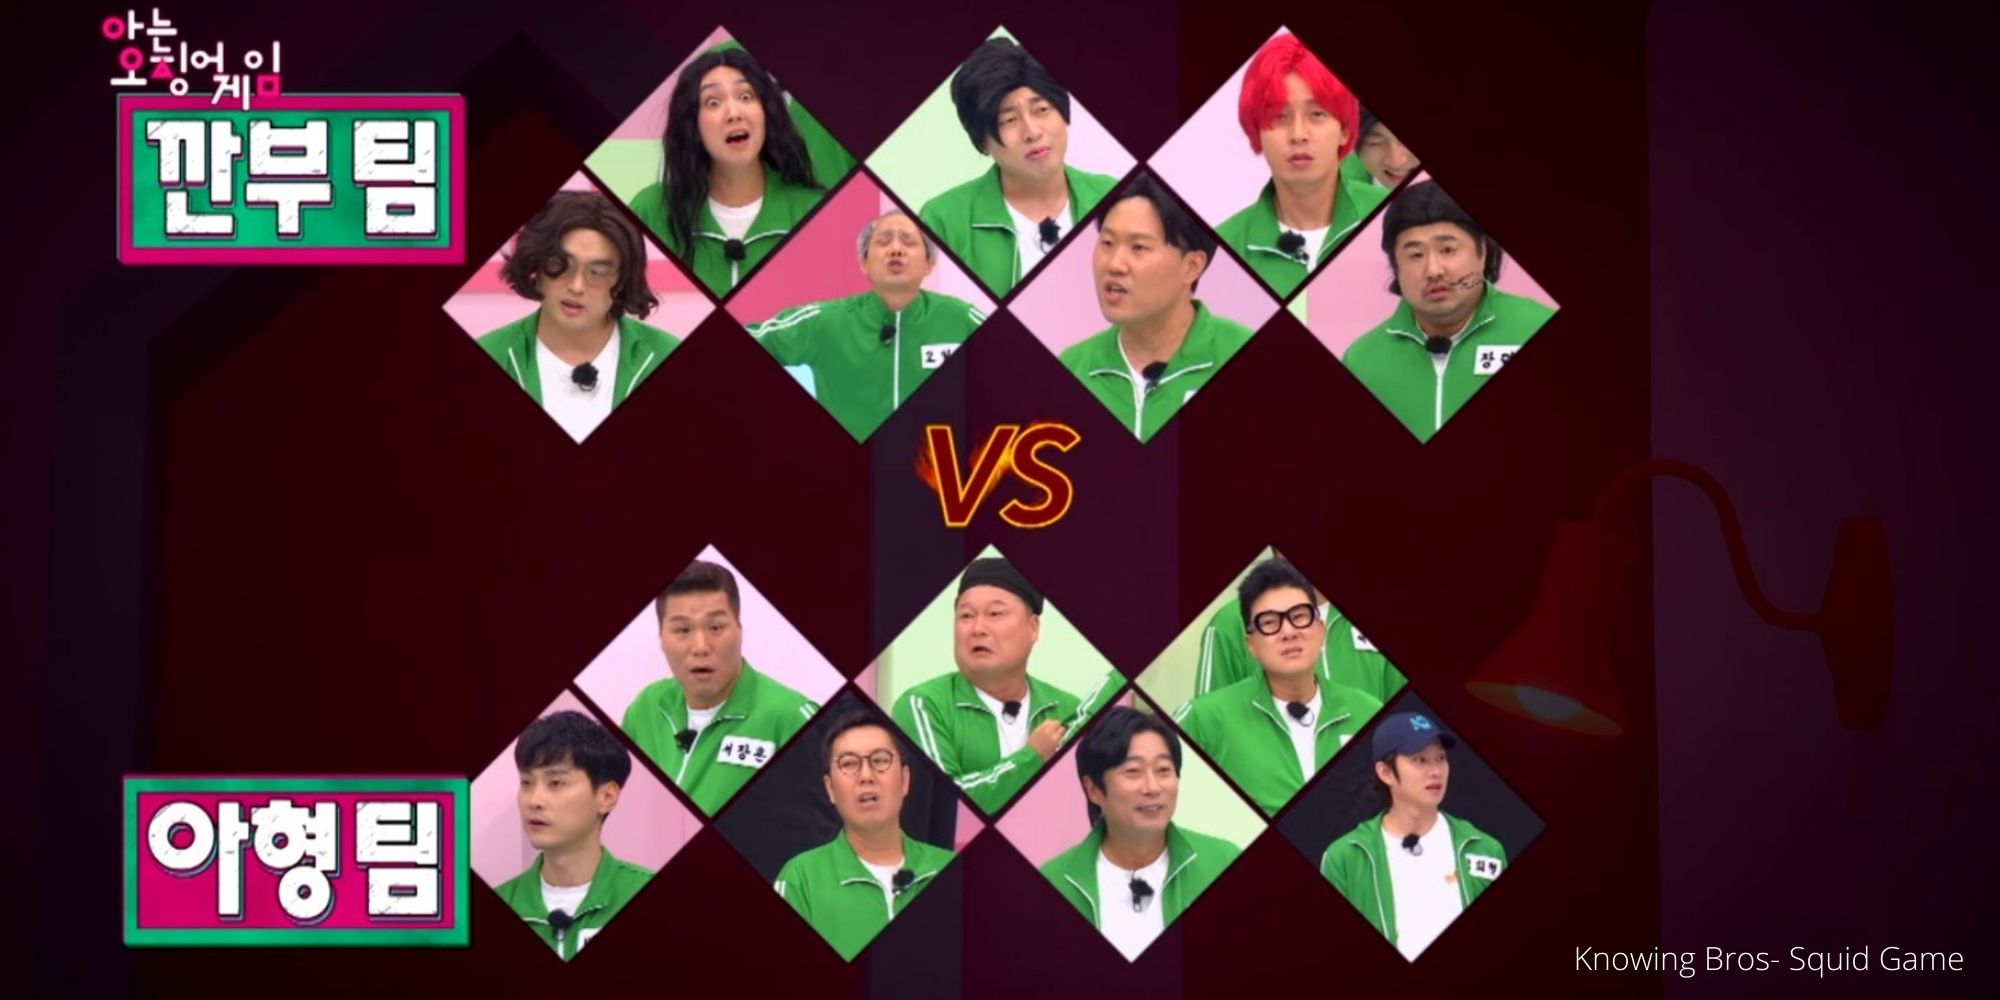 Knowing Bros- Squid Game